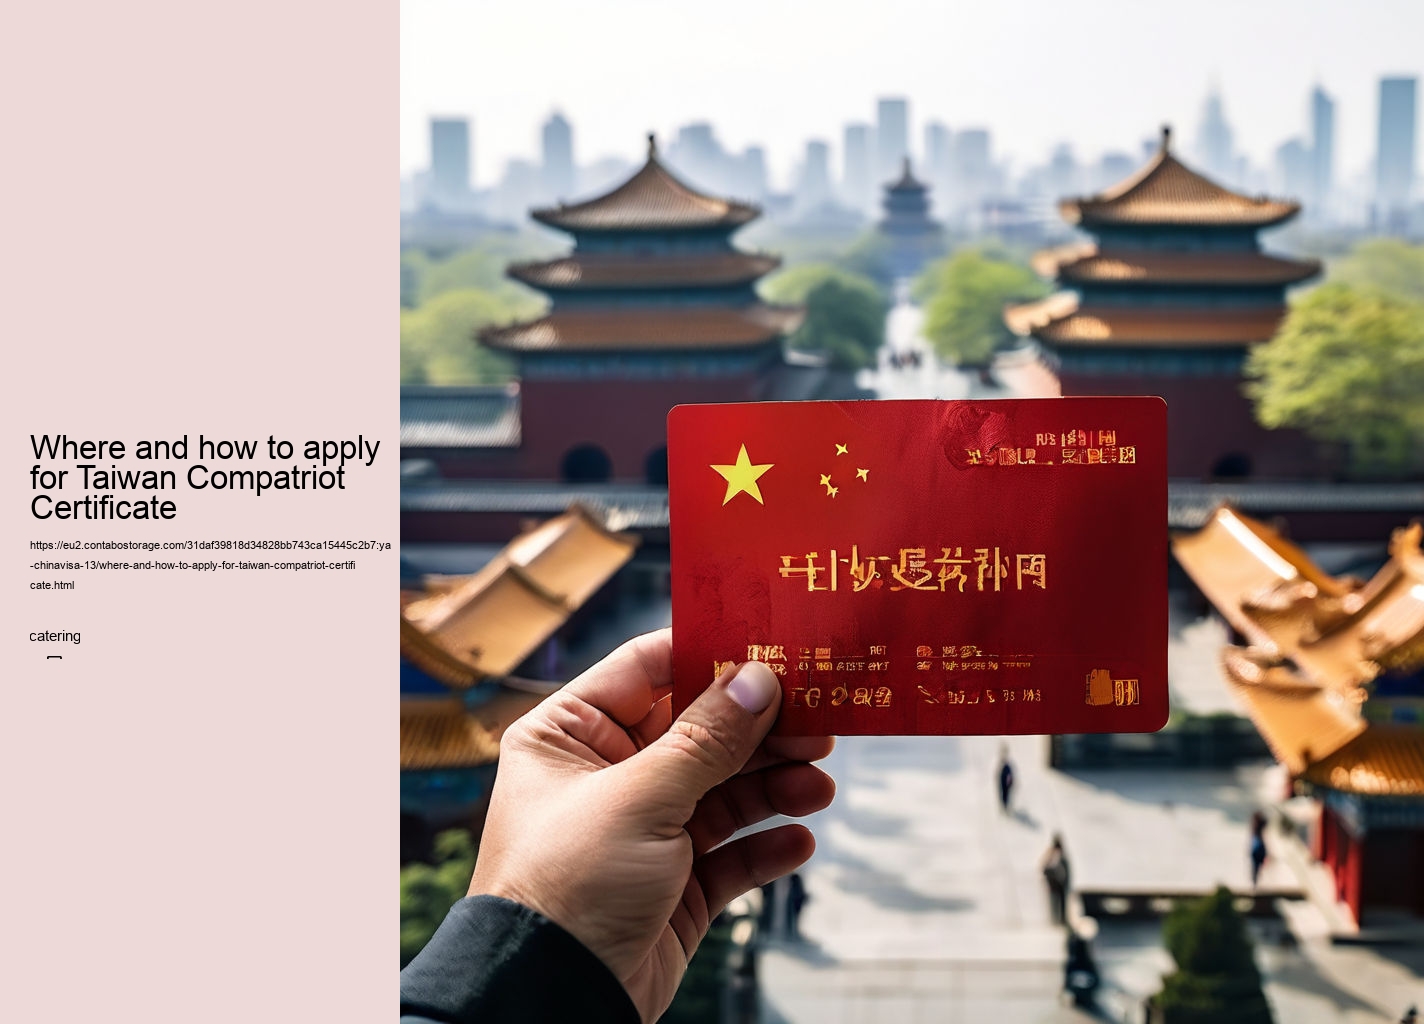 Where and how to apply for Taiwan Compatriot Certificate